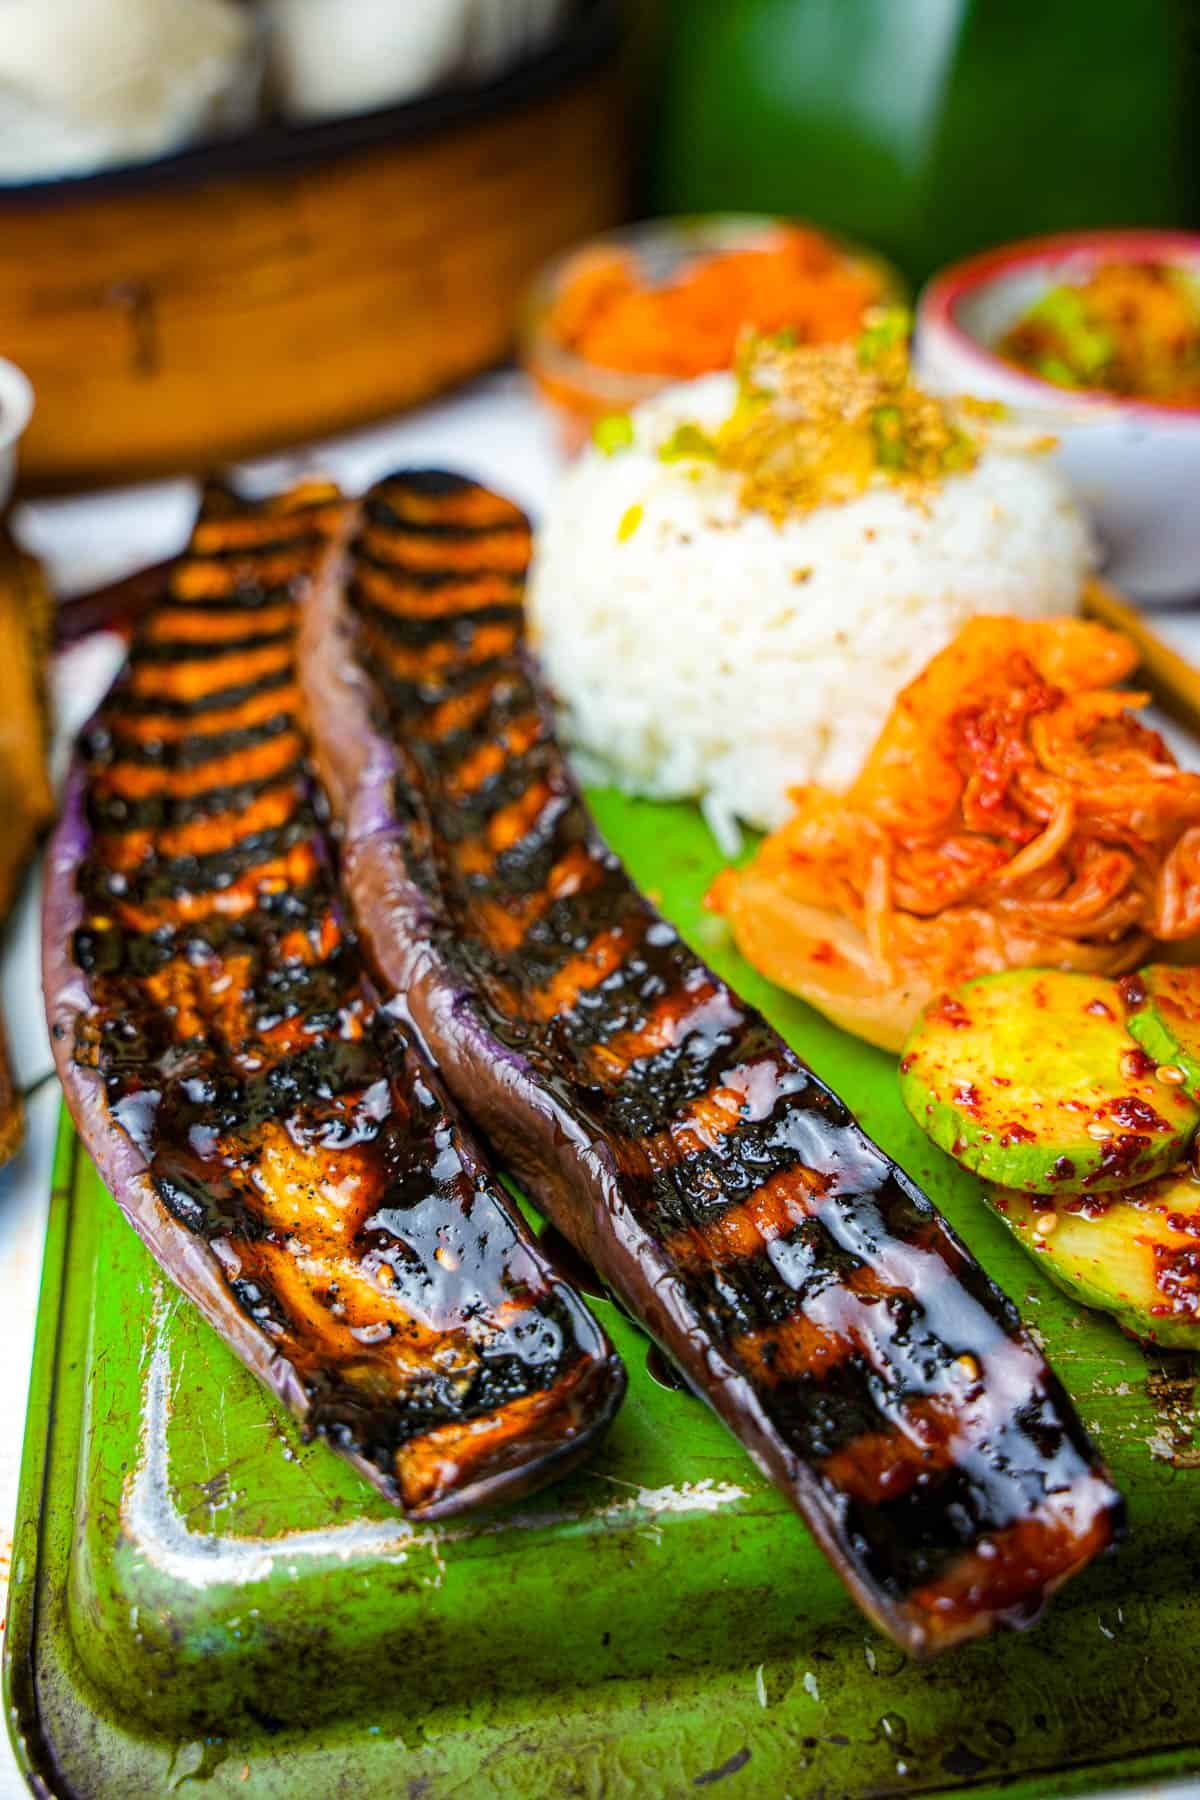 Grilled eggplant, with sides of oi muchim, kimchi, and white rice on a green metal tray.